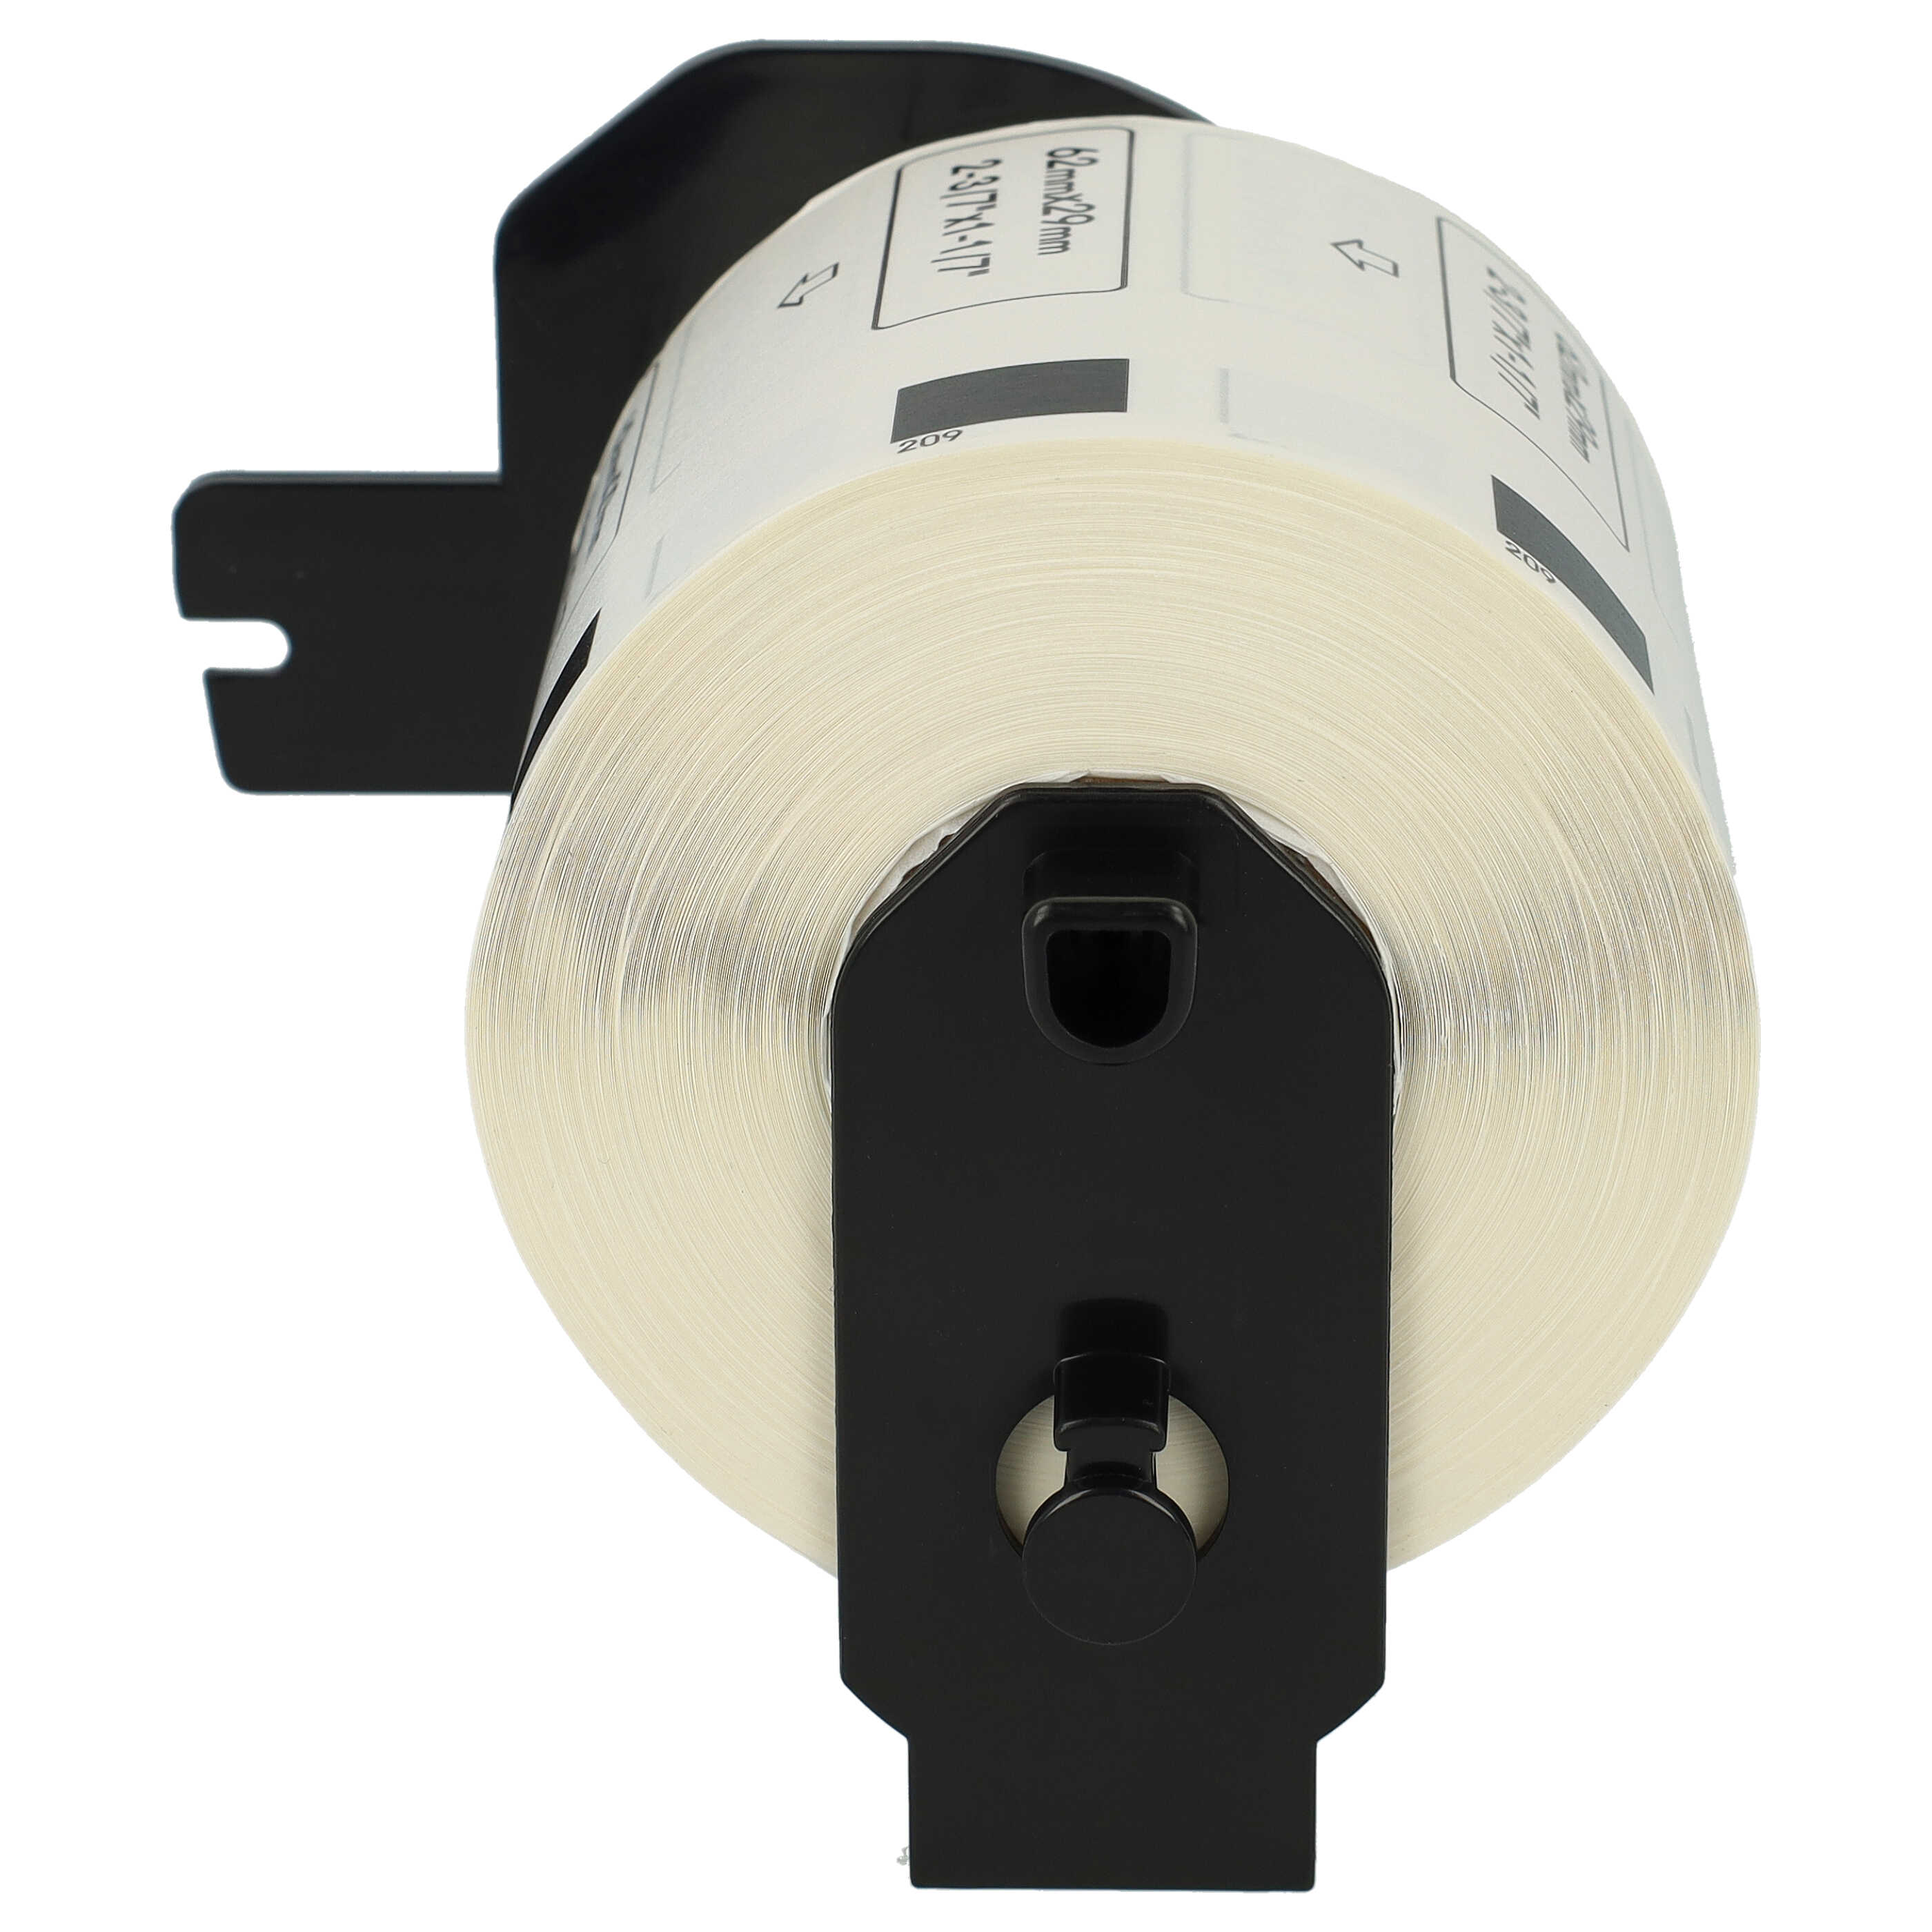 Labels replaces Brother DK-11209 for Labeller - 62 mm x 29 mm + Holder